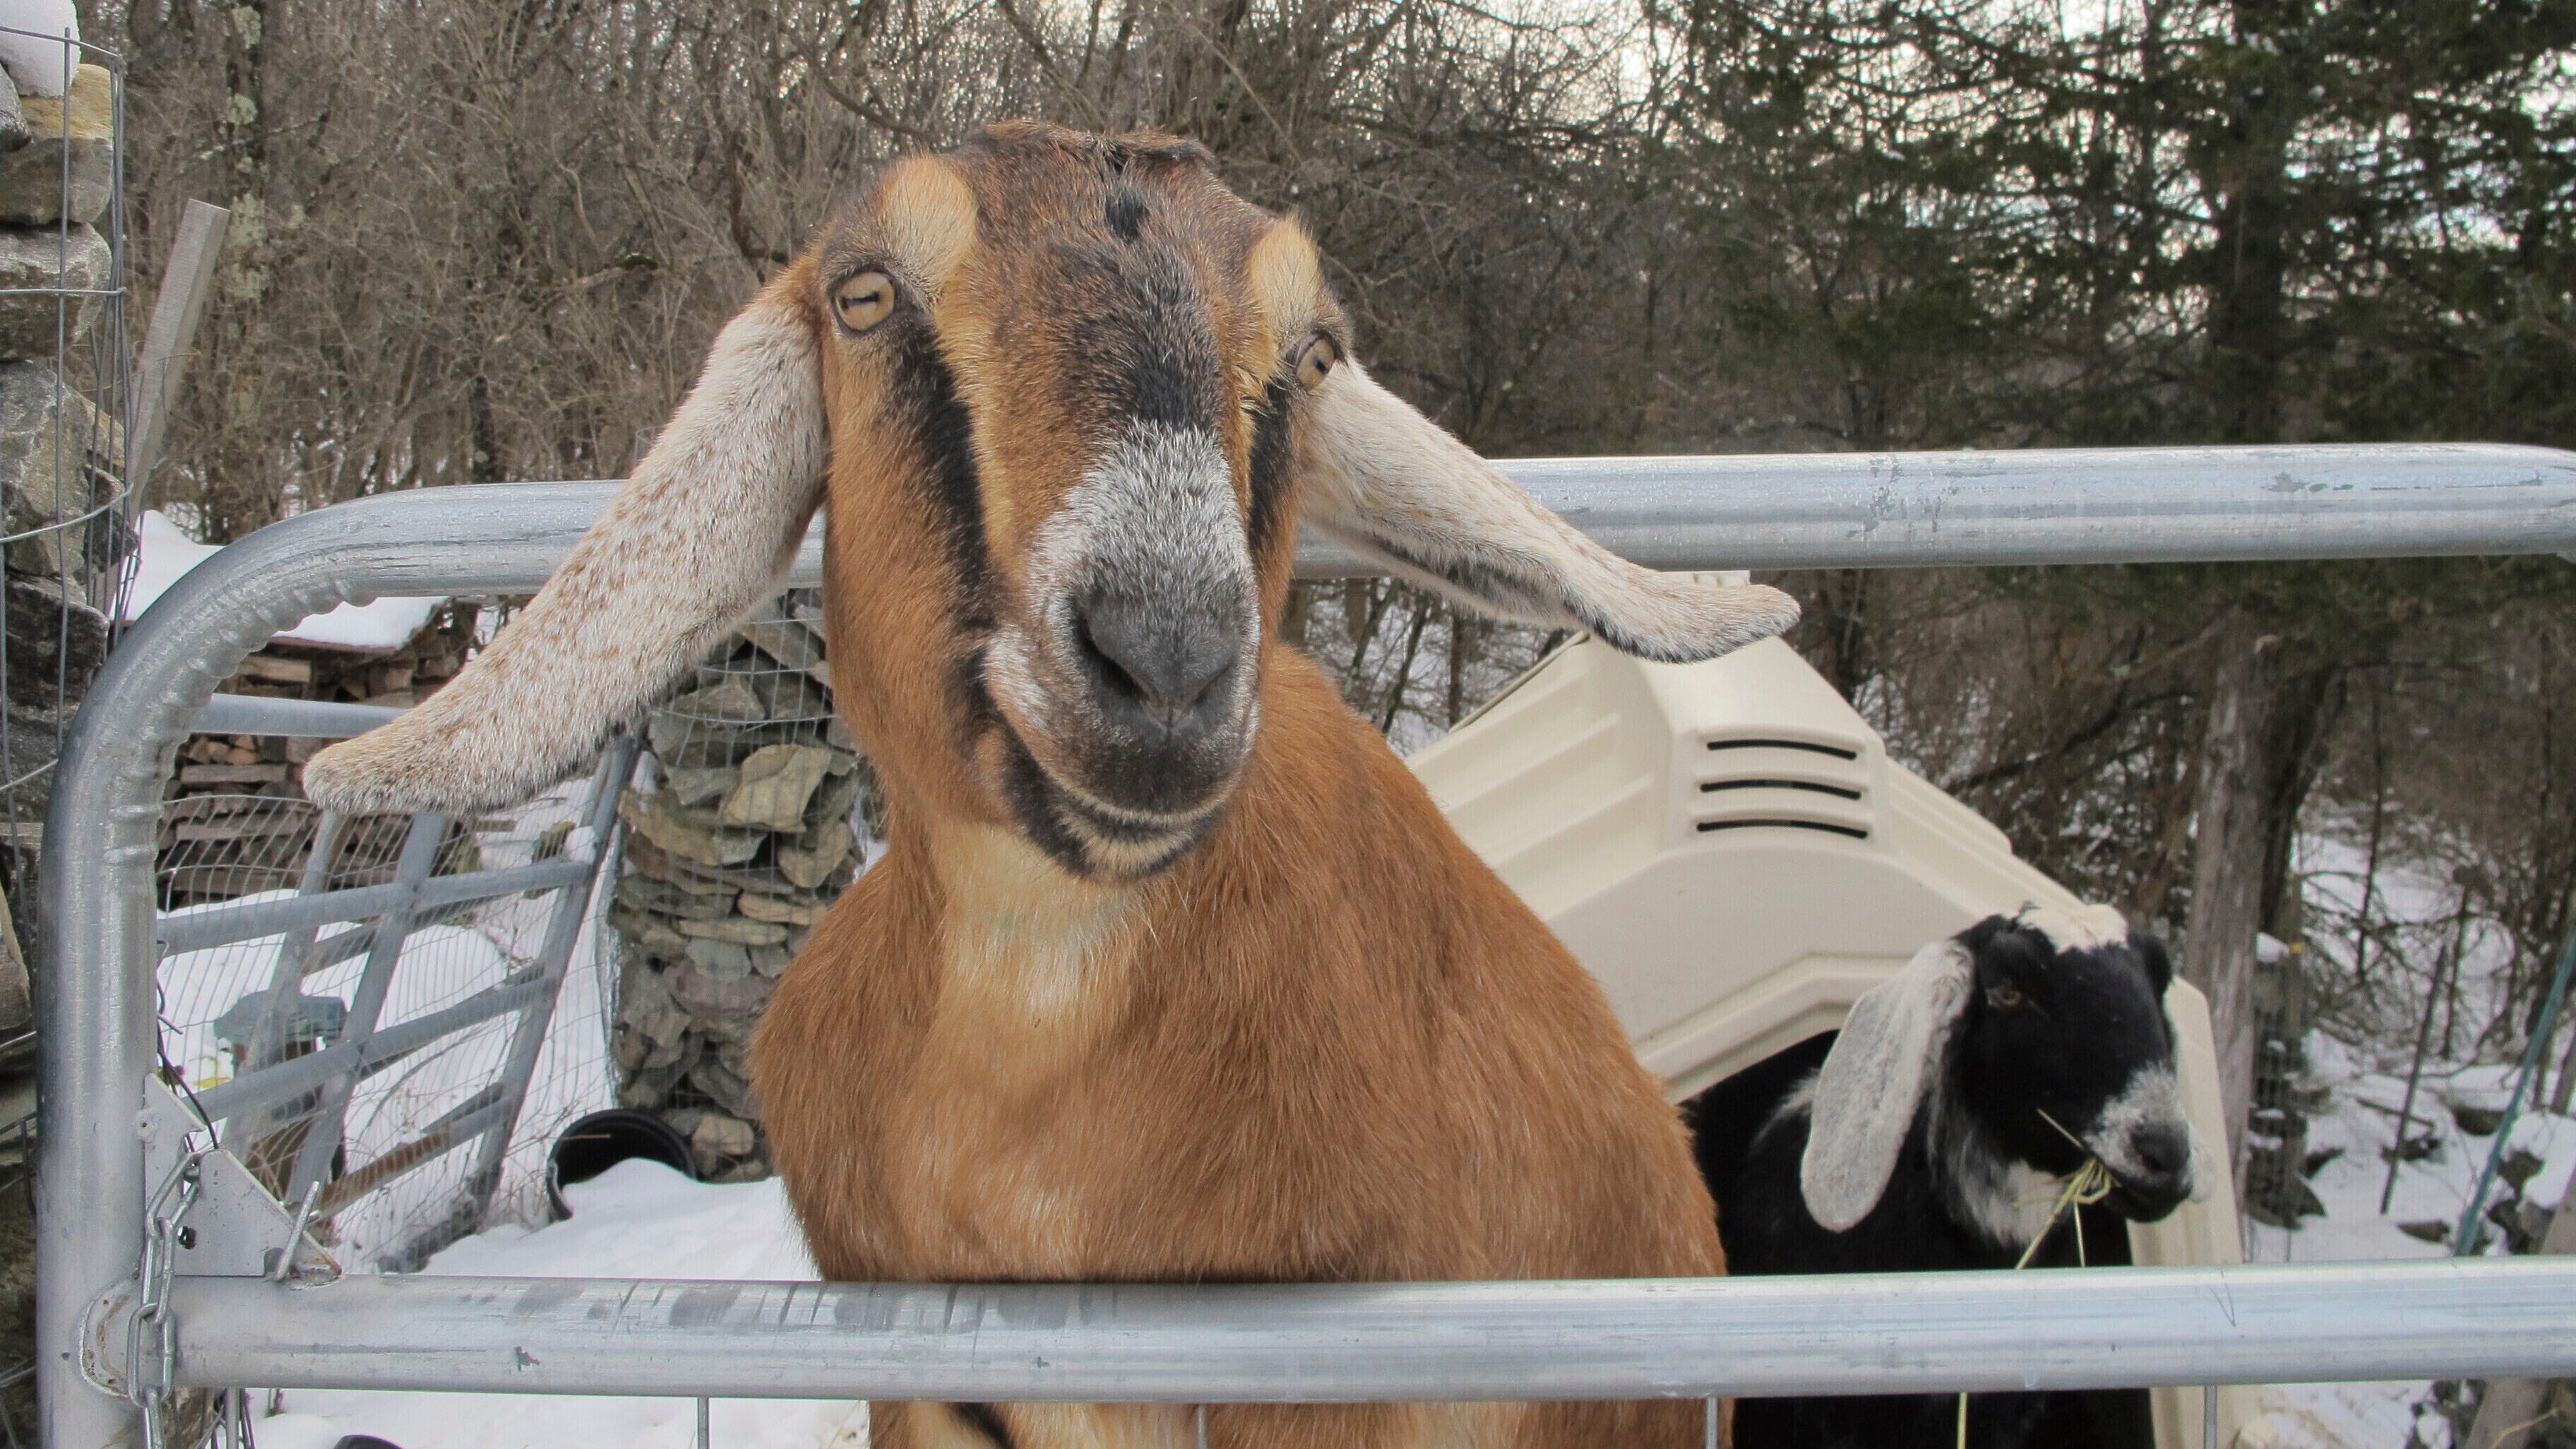 A goat and a dog were elected mayors as fundraiser for Vermont playground